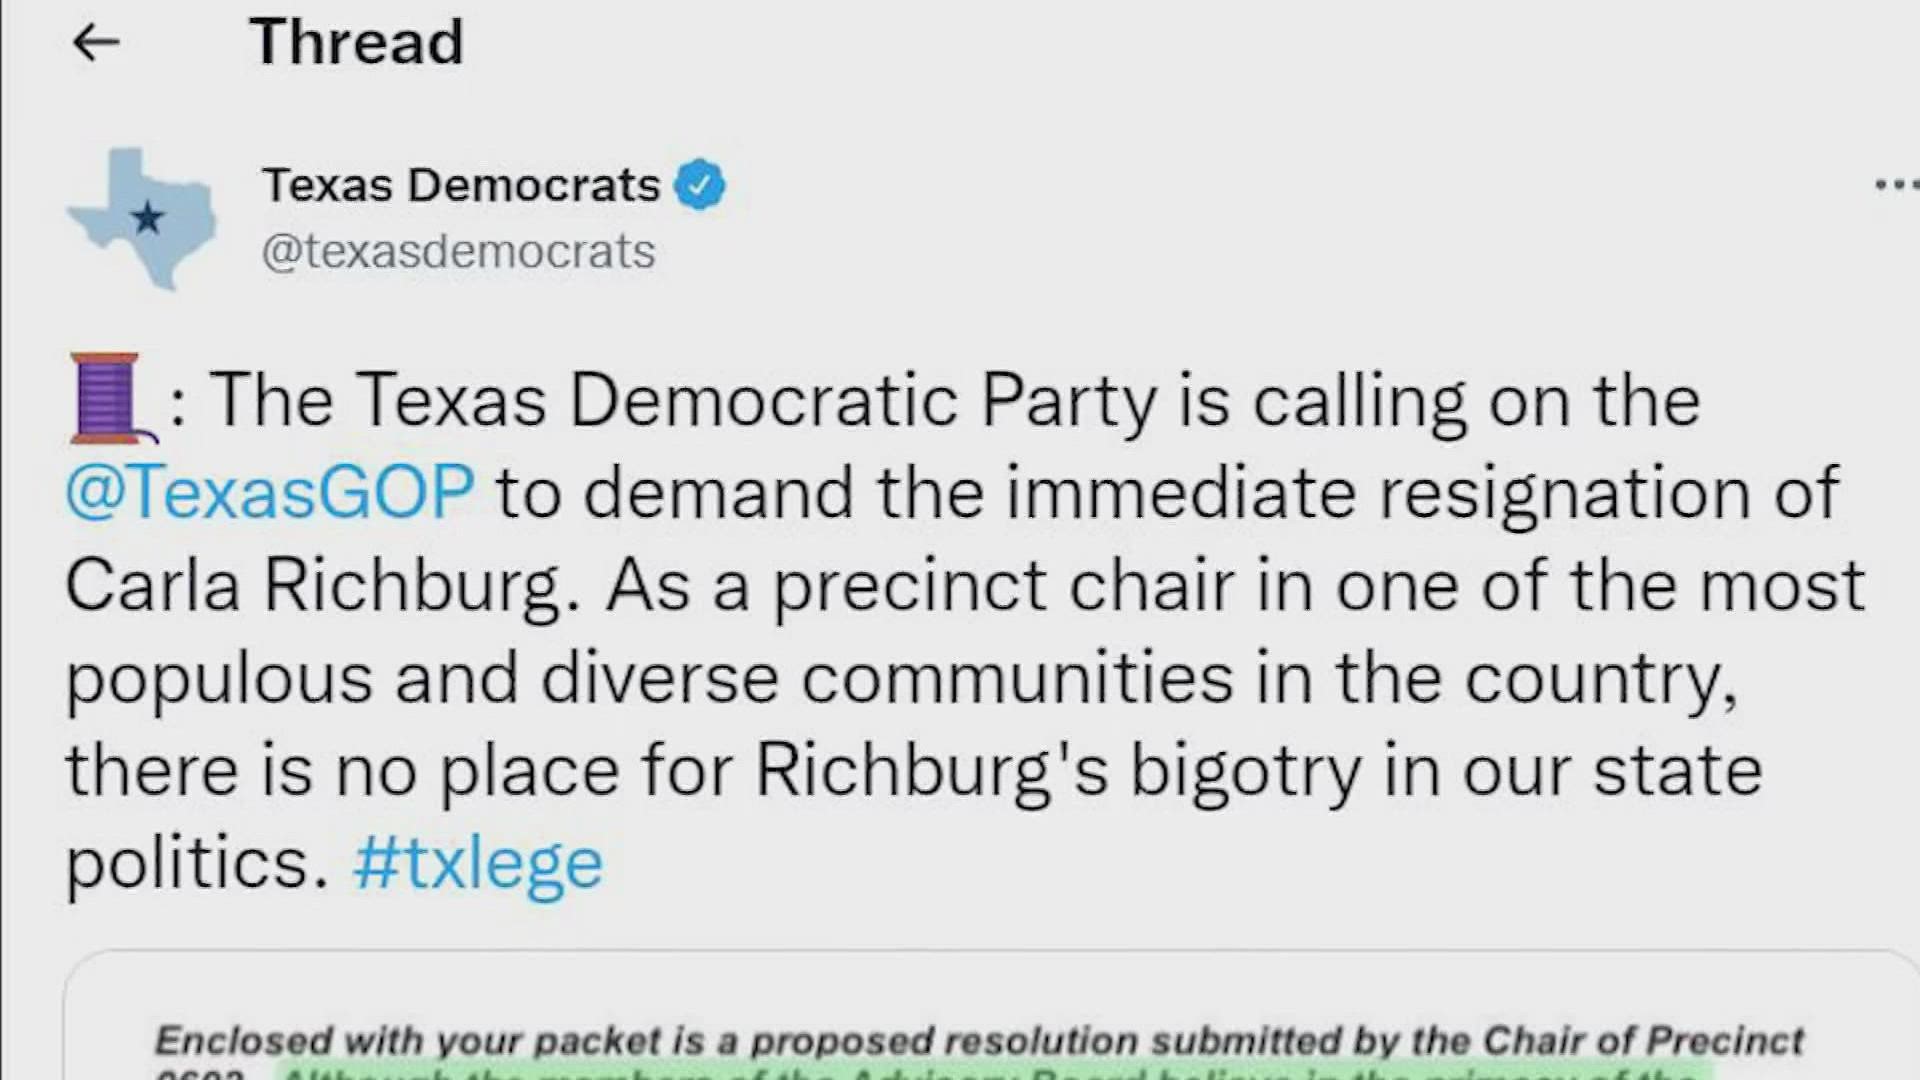 There are growing calls for the removal of a Harris County GOP precinct chair who is proposing some controversial resolutions.